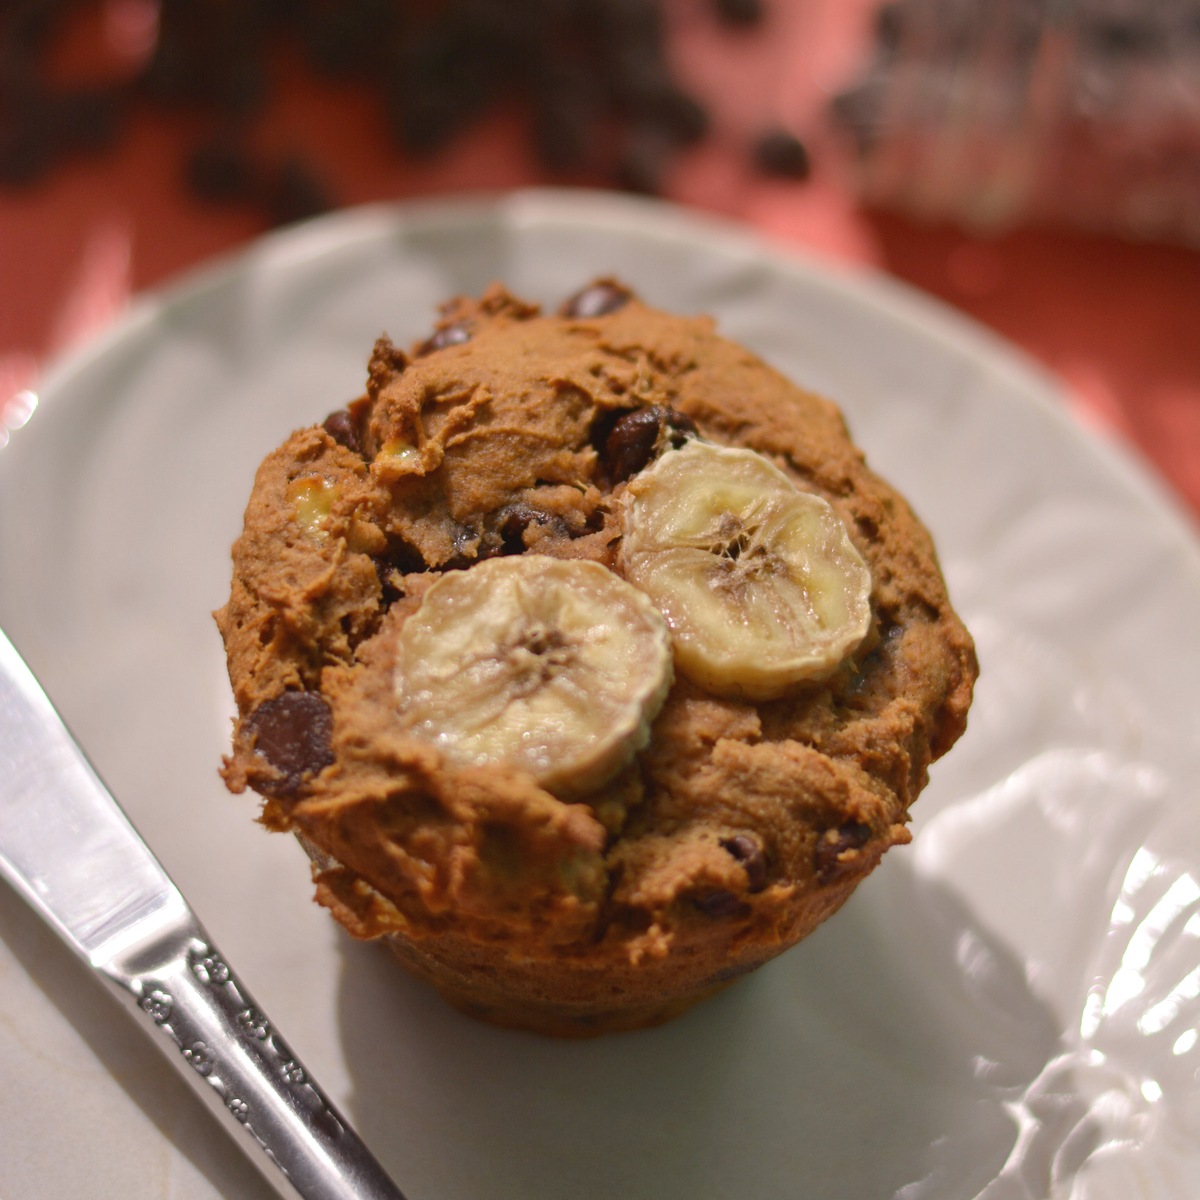 Muffin with two banana slices on top.